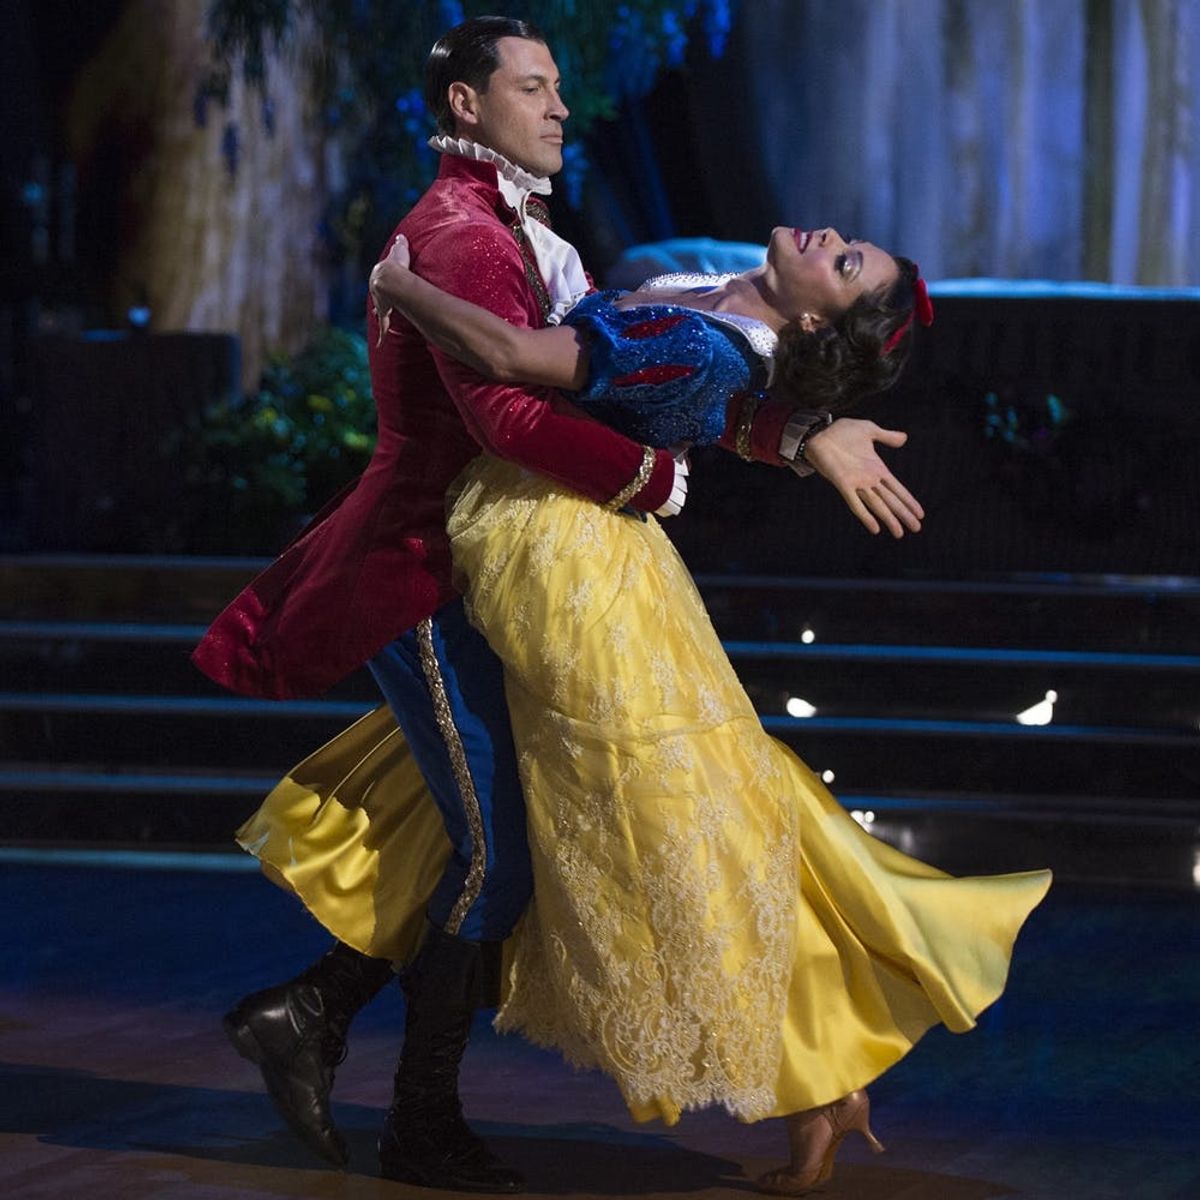 See Dancing With the Stars’ Disney Night Costumes!